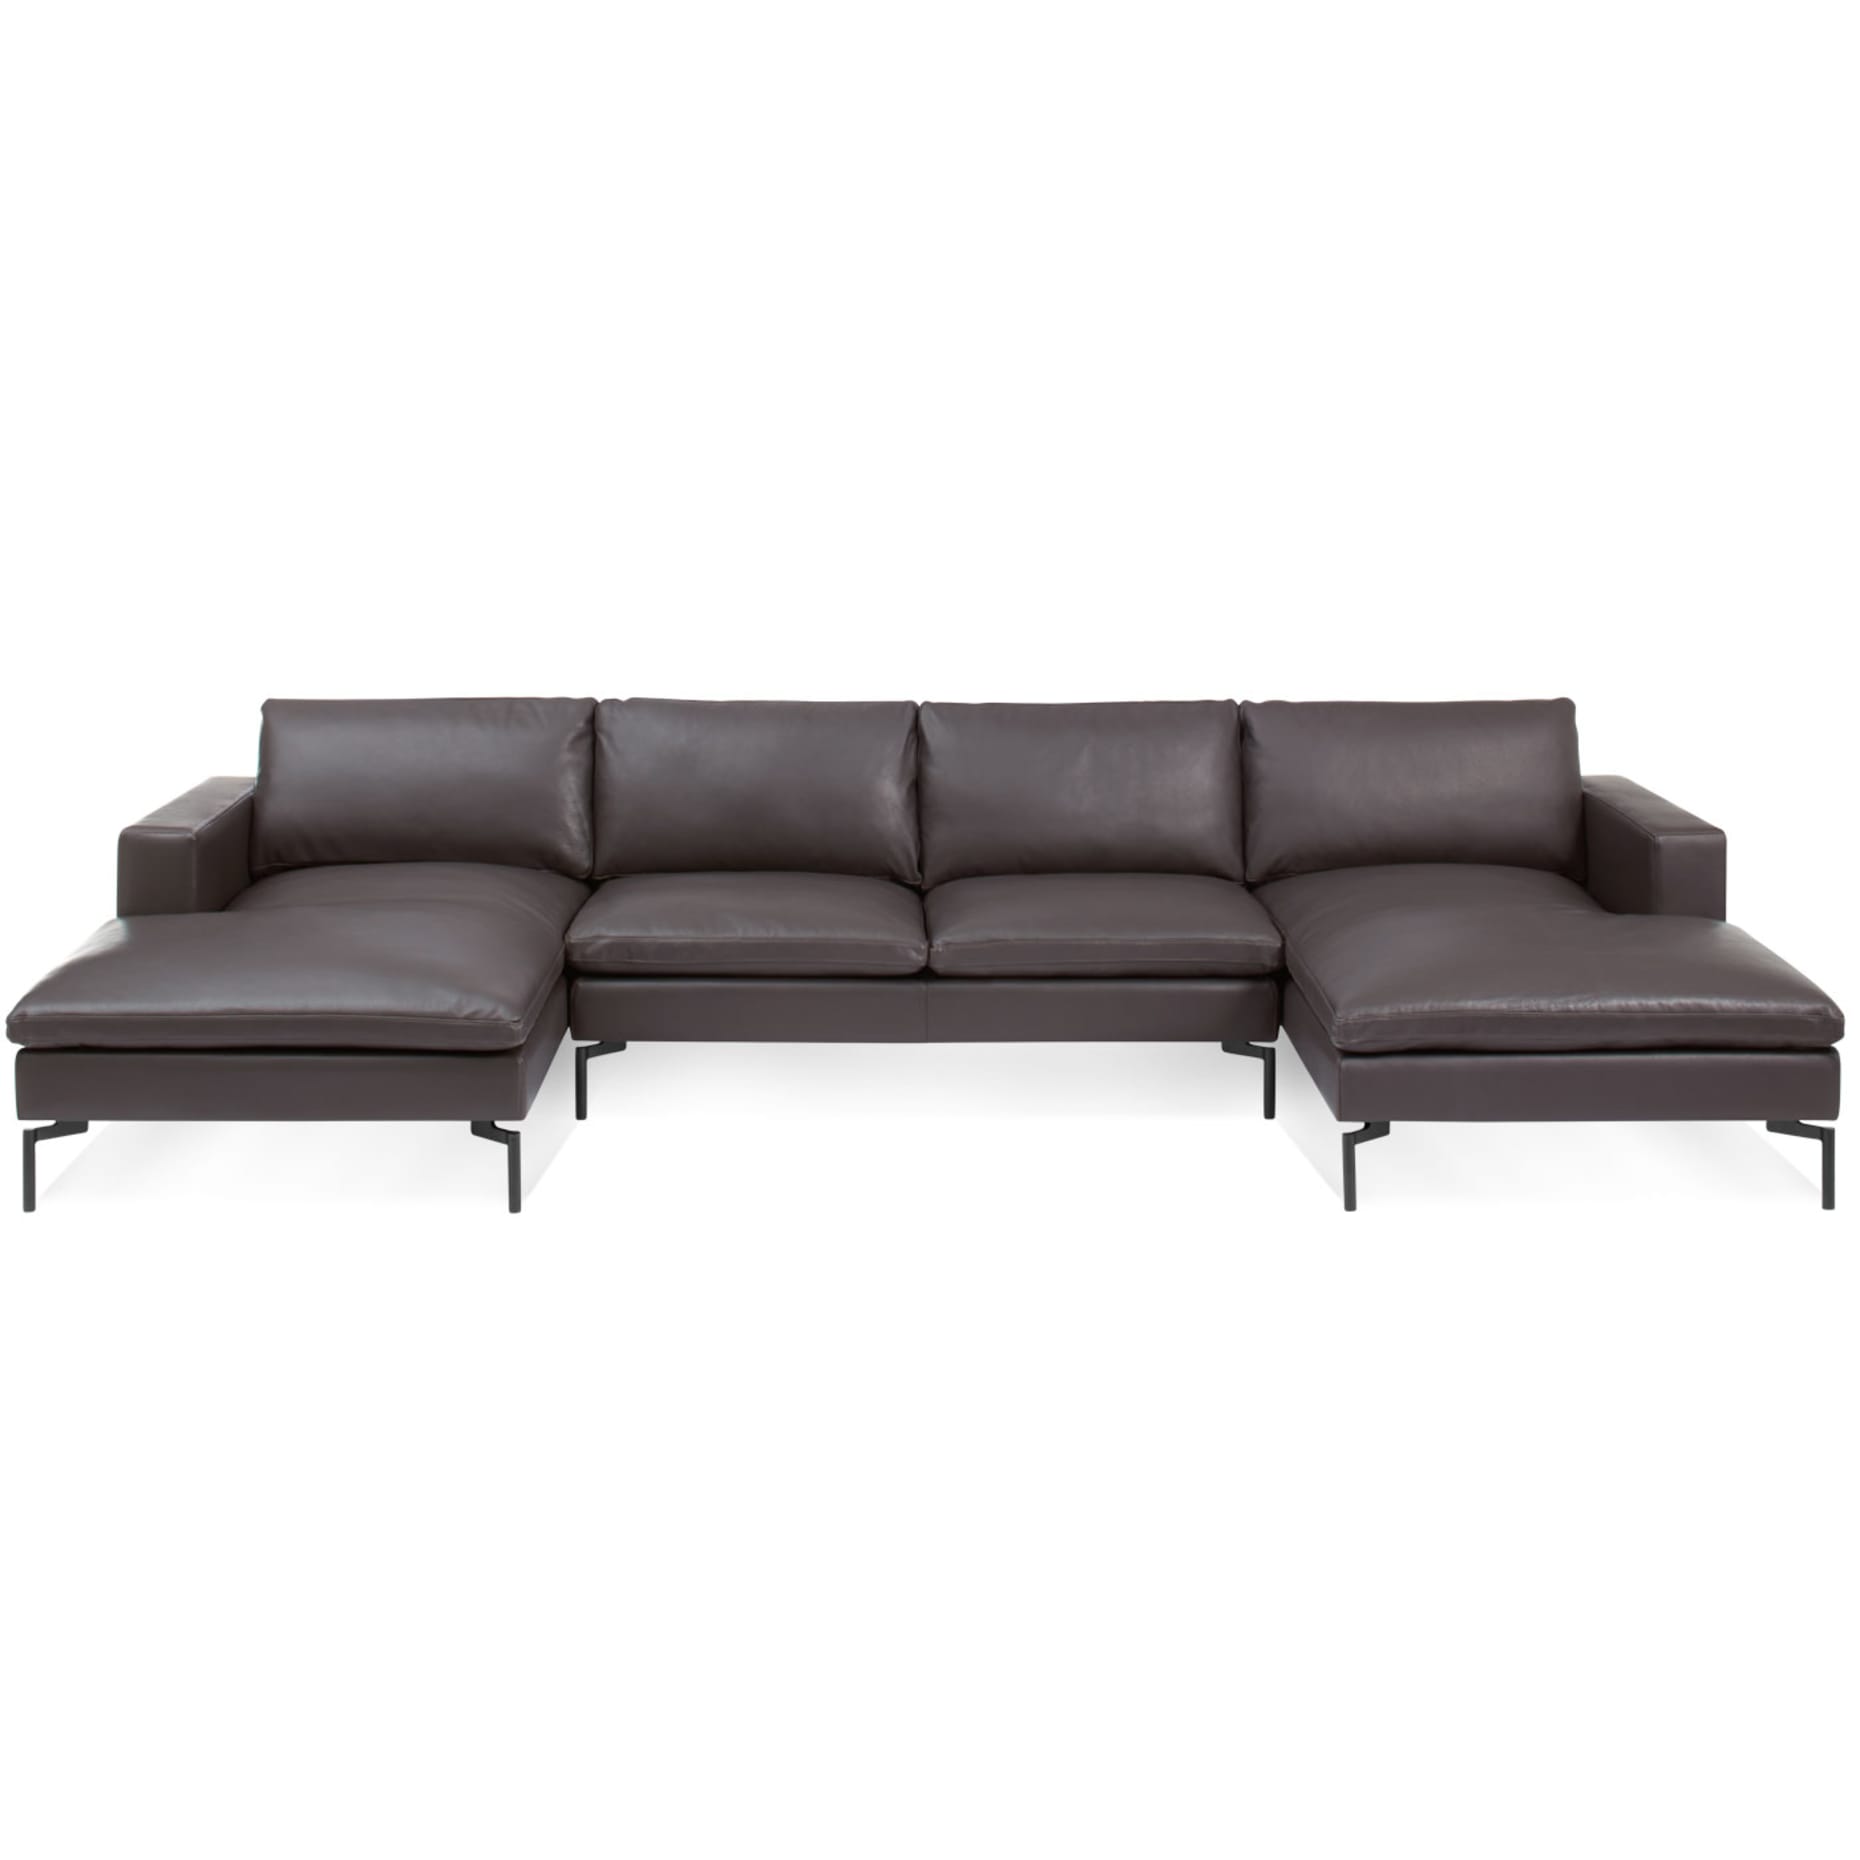 U Shaped Leather Sectional Sofa D3, Leather Couches San Diego